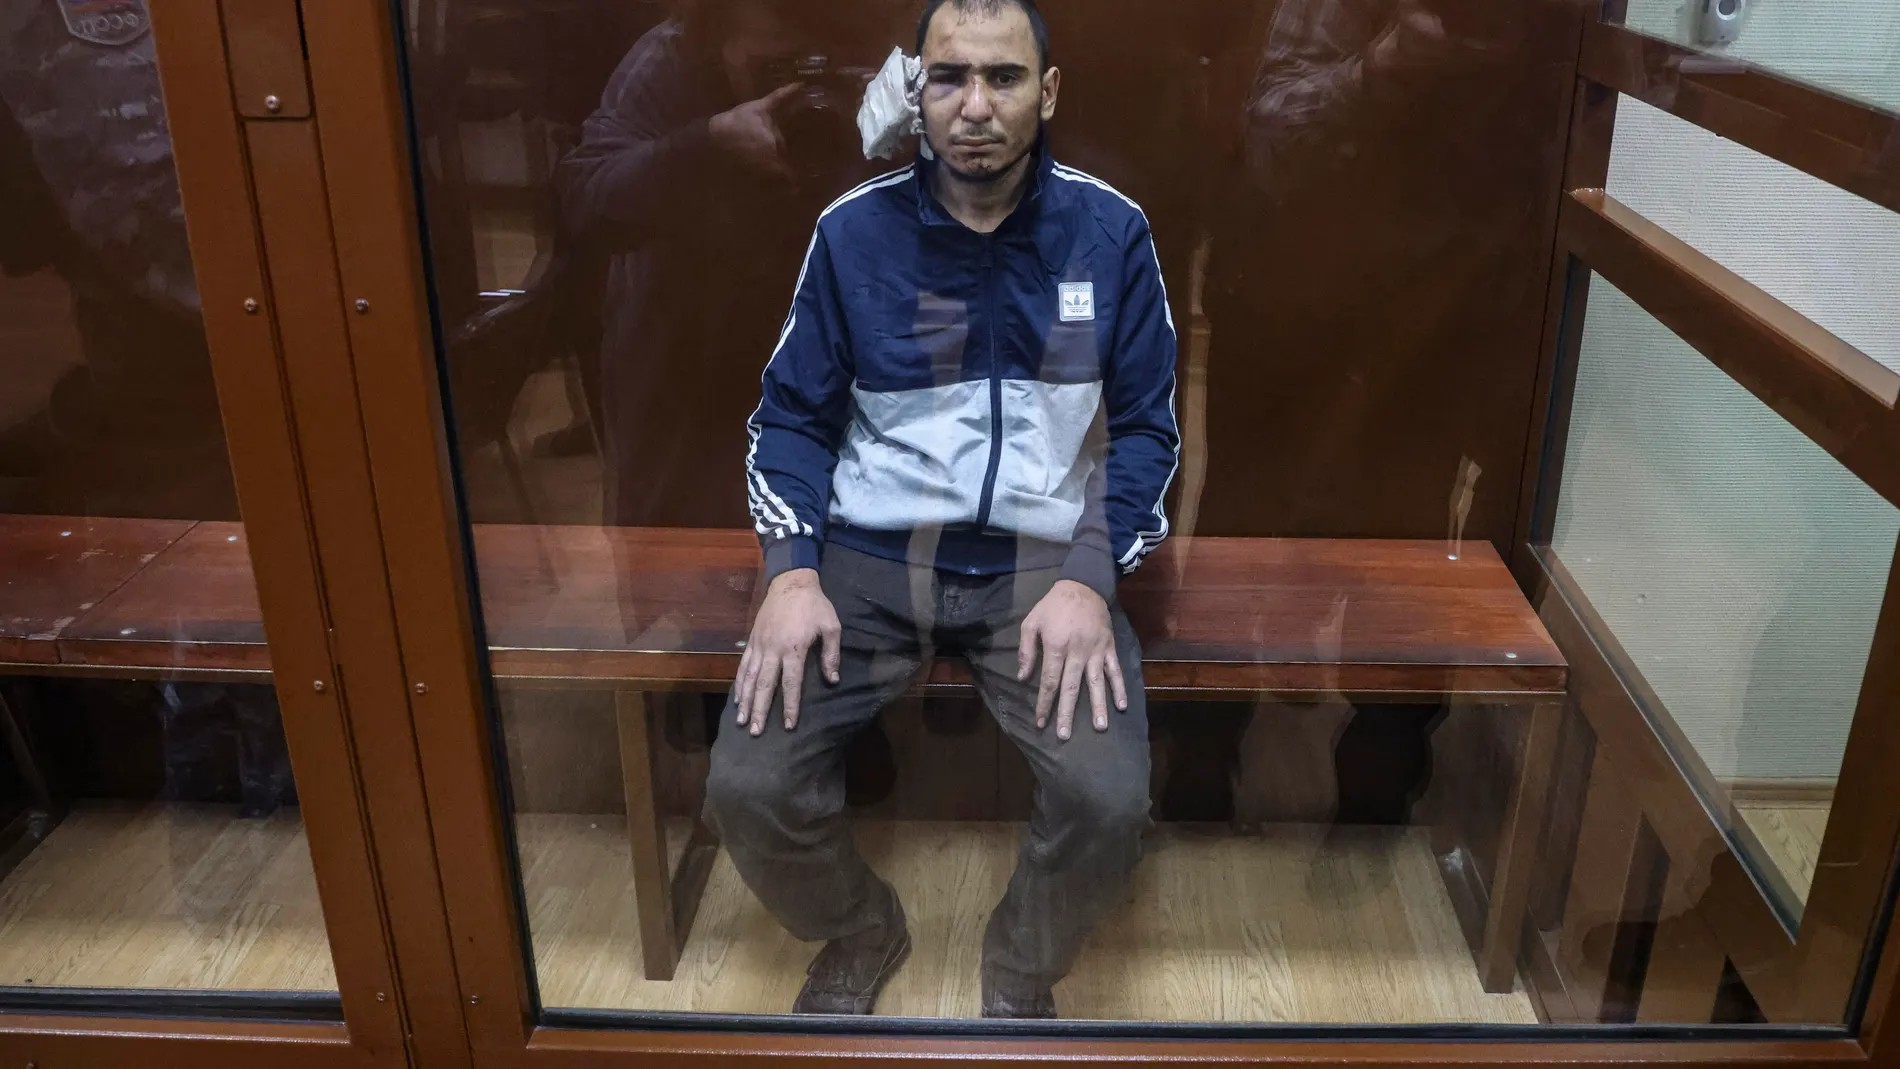 Moscow (Russian Federation), 24/03/2024.- A suspect in the shooting attack on the Crocus City Hall concert venue sits inside a defendant's enclosure during a hearing on pretrial restrictions at Basmanny district court, in Moscow, Russia, 24 March 2024. At least 137 people were killed and more than 180 hospitalized after a group of gunmen attacked the concert hall in the Moscow region on 22 March evening, Russian officials said. Eleven suspects, including all four gunmen directly involved in t...